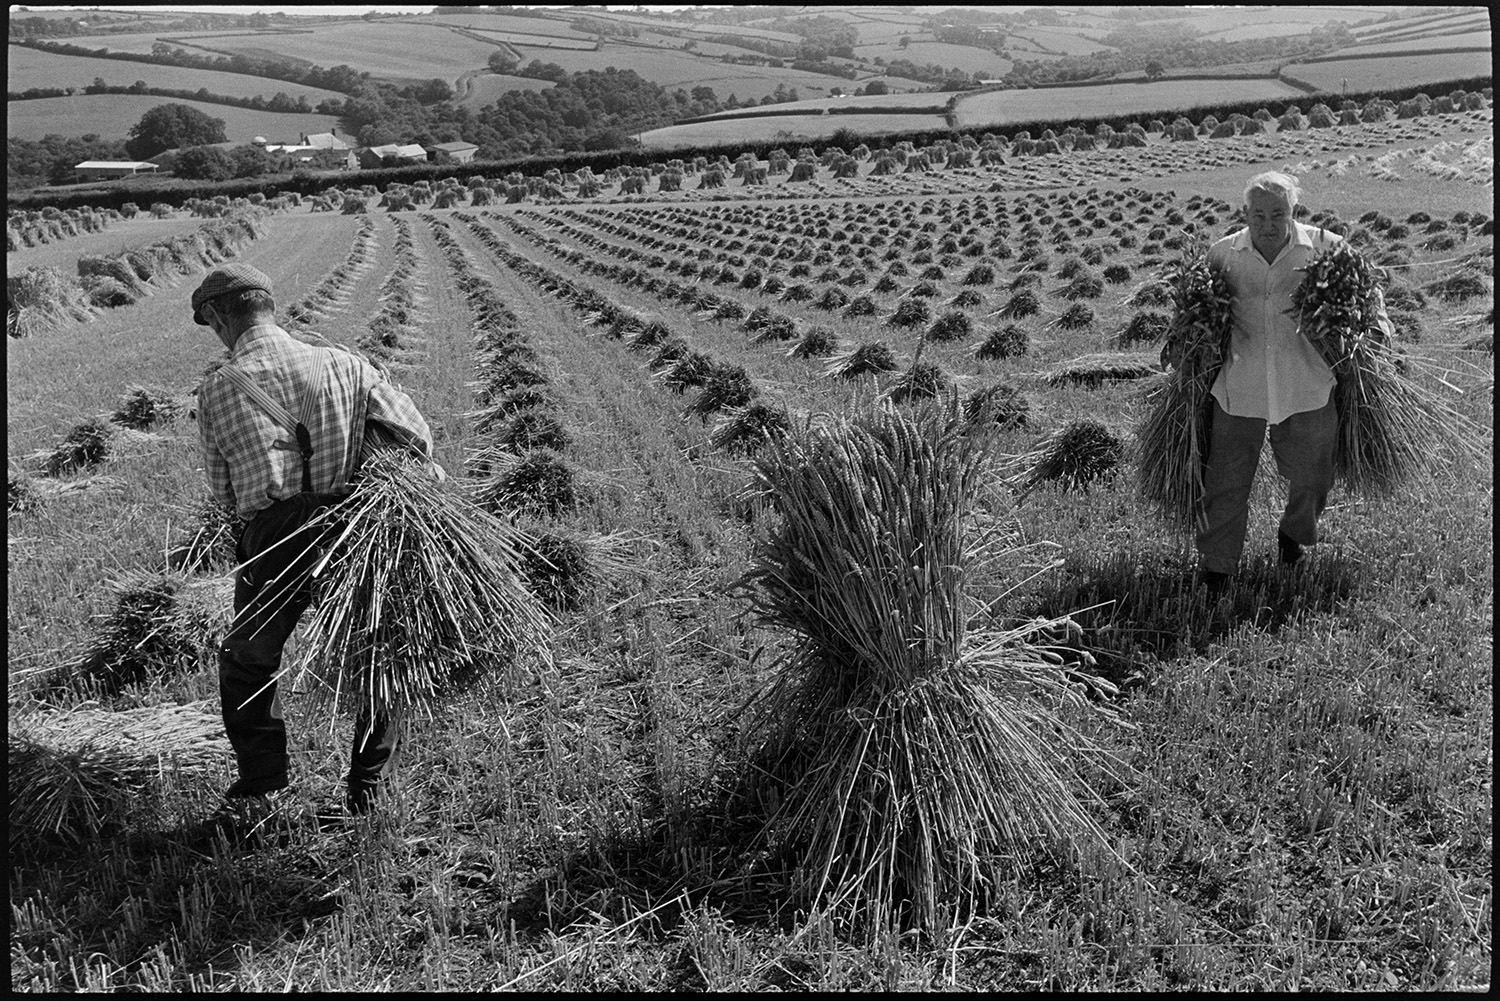 Men setting up stooks.
[Two men, including Mr Down, setting up stooks of corn in a field at Spittle, Chulmleigh, with a view of surrounding fields, hedges and farm buildings  in the background.]